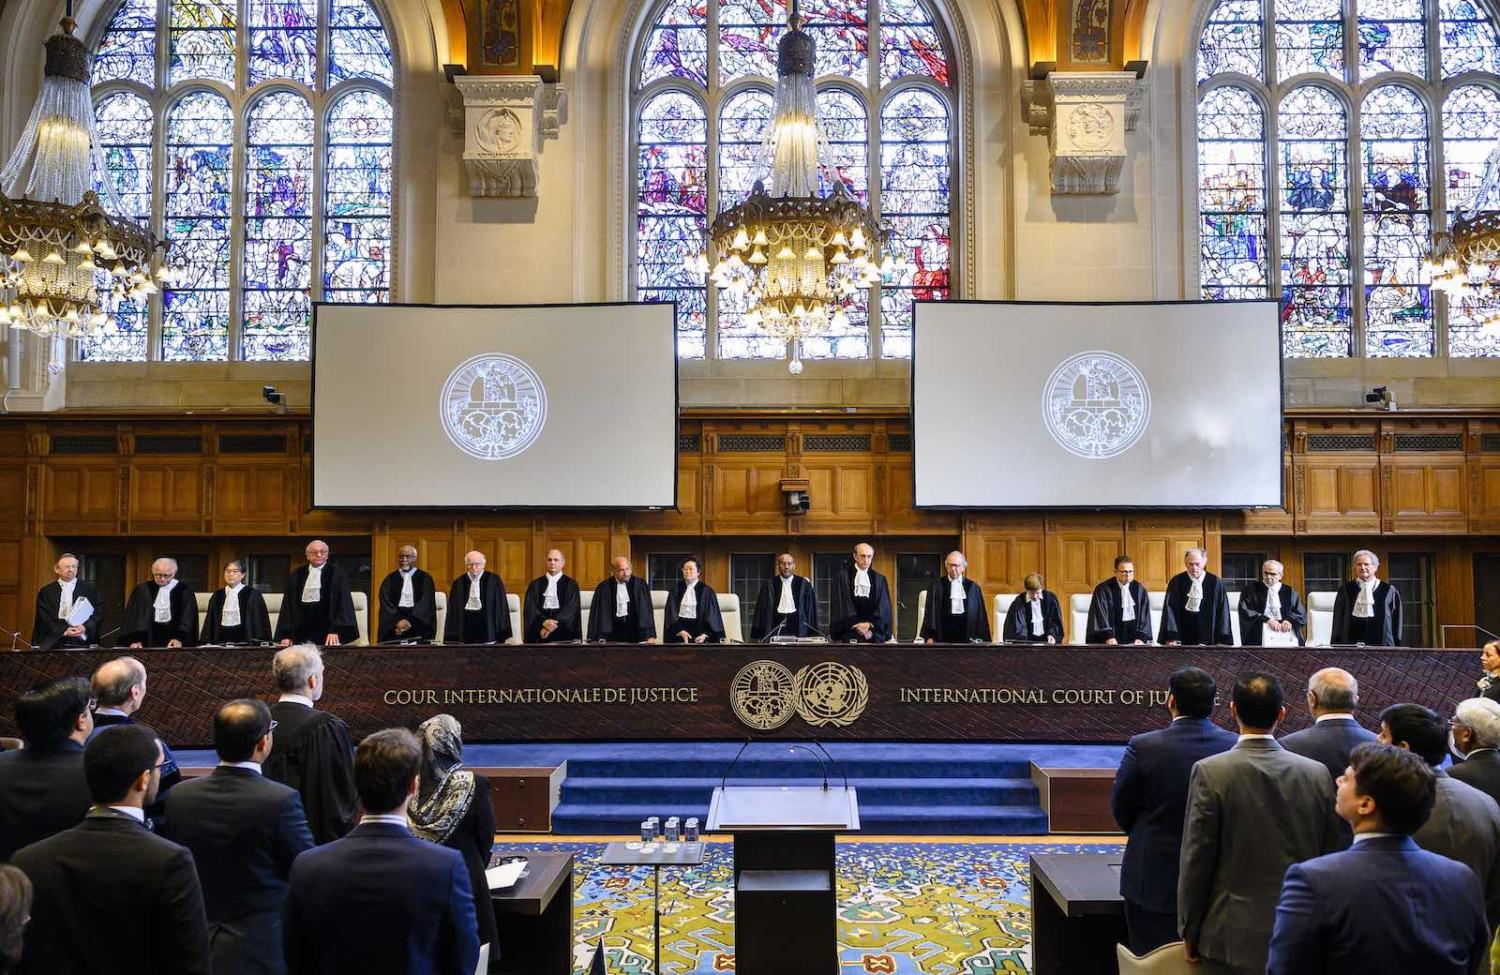 The International Court of Justice at The Hague during proceedings in May involving Qatar versus United Arab Emirates (Photo: Frank van Beek/United Nations)